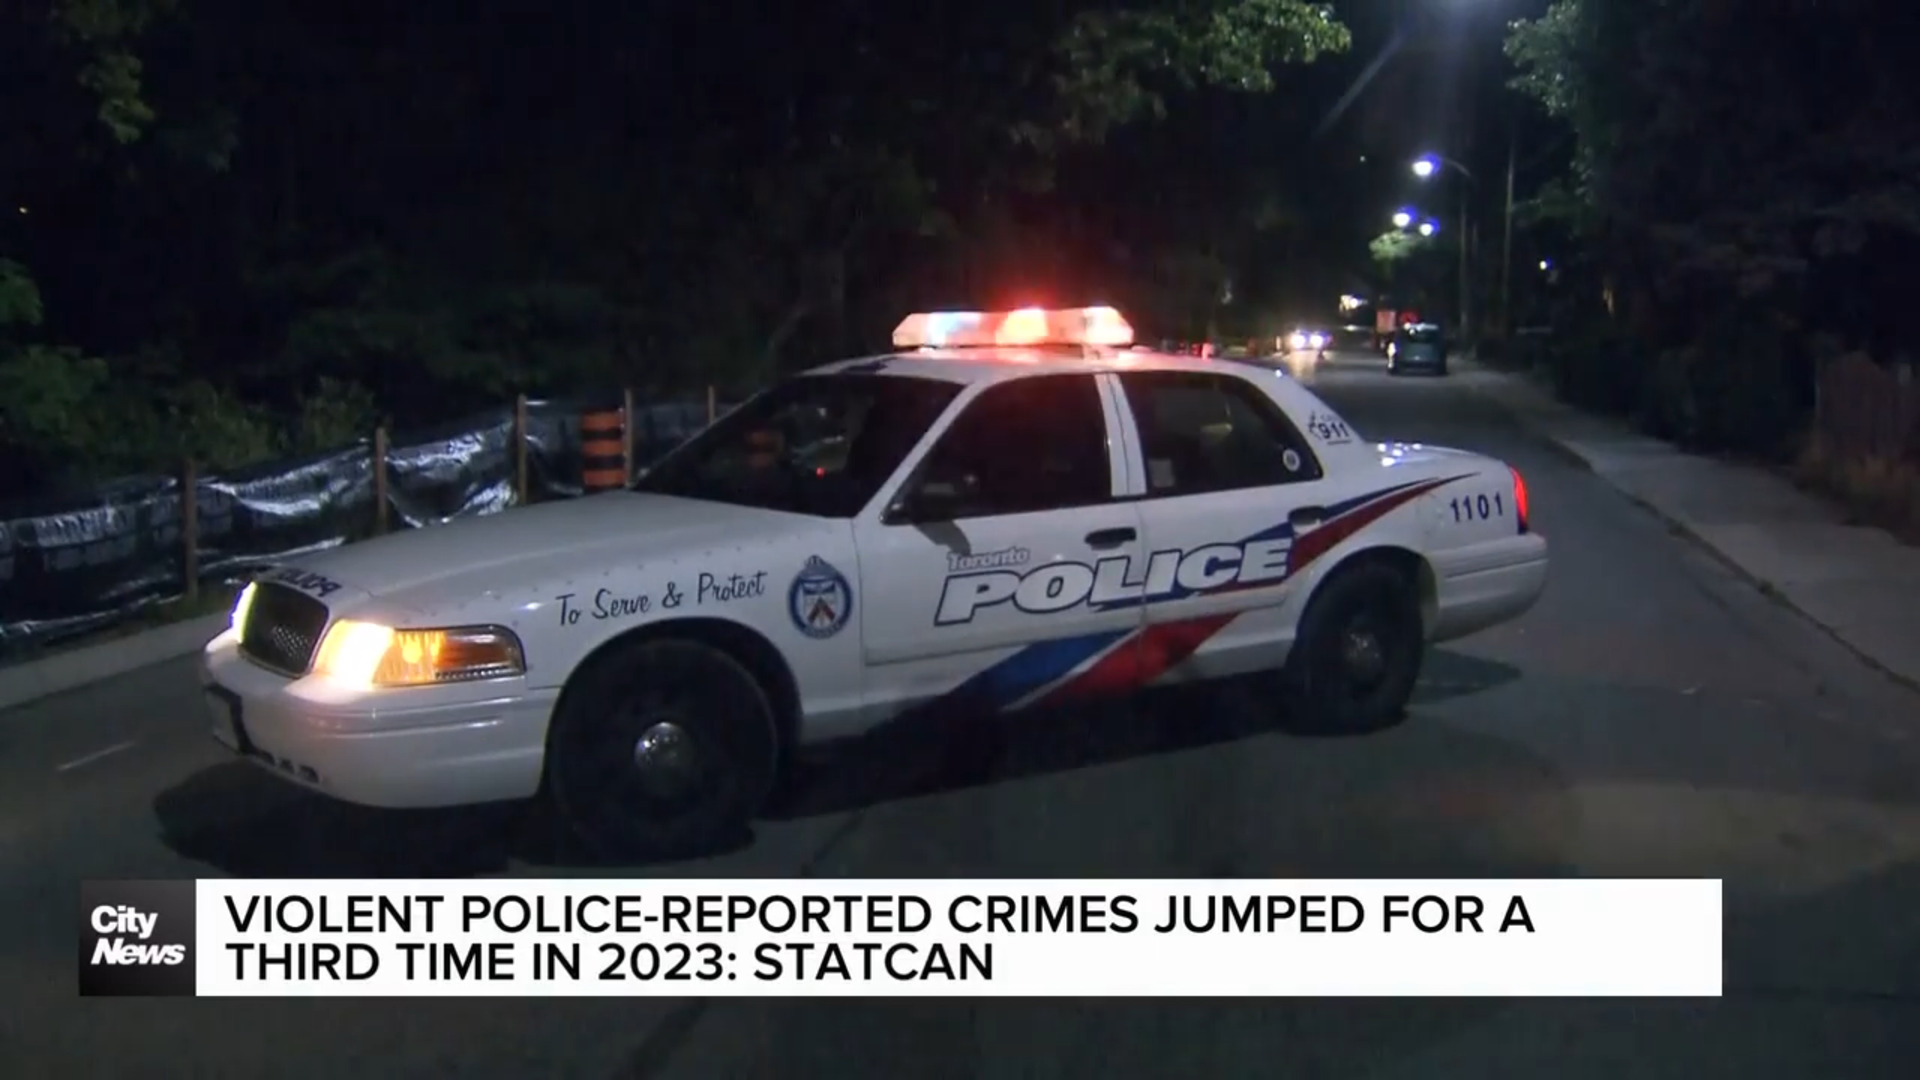 Violent police-reported crimes increased for a third time in 2023: StatCan